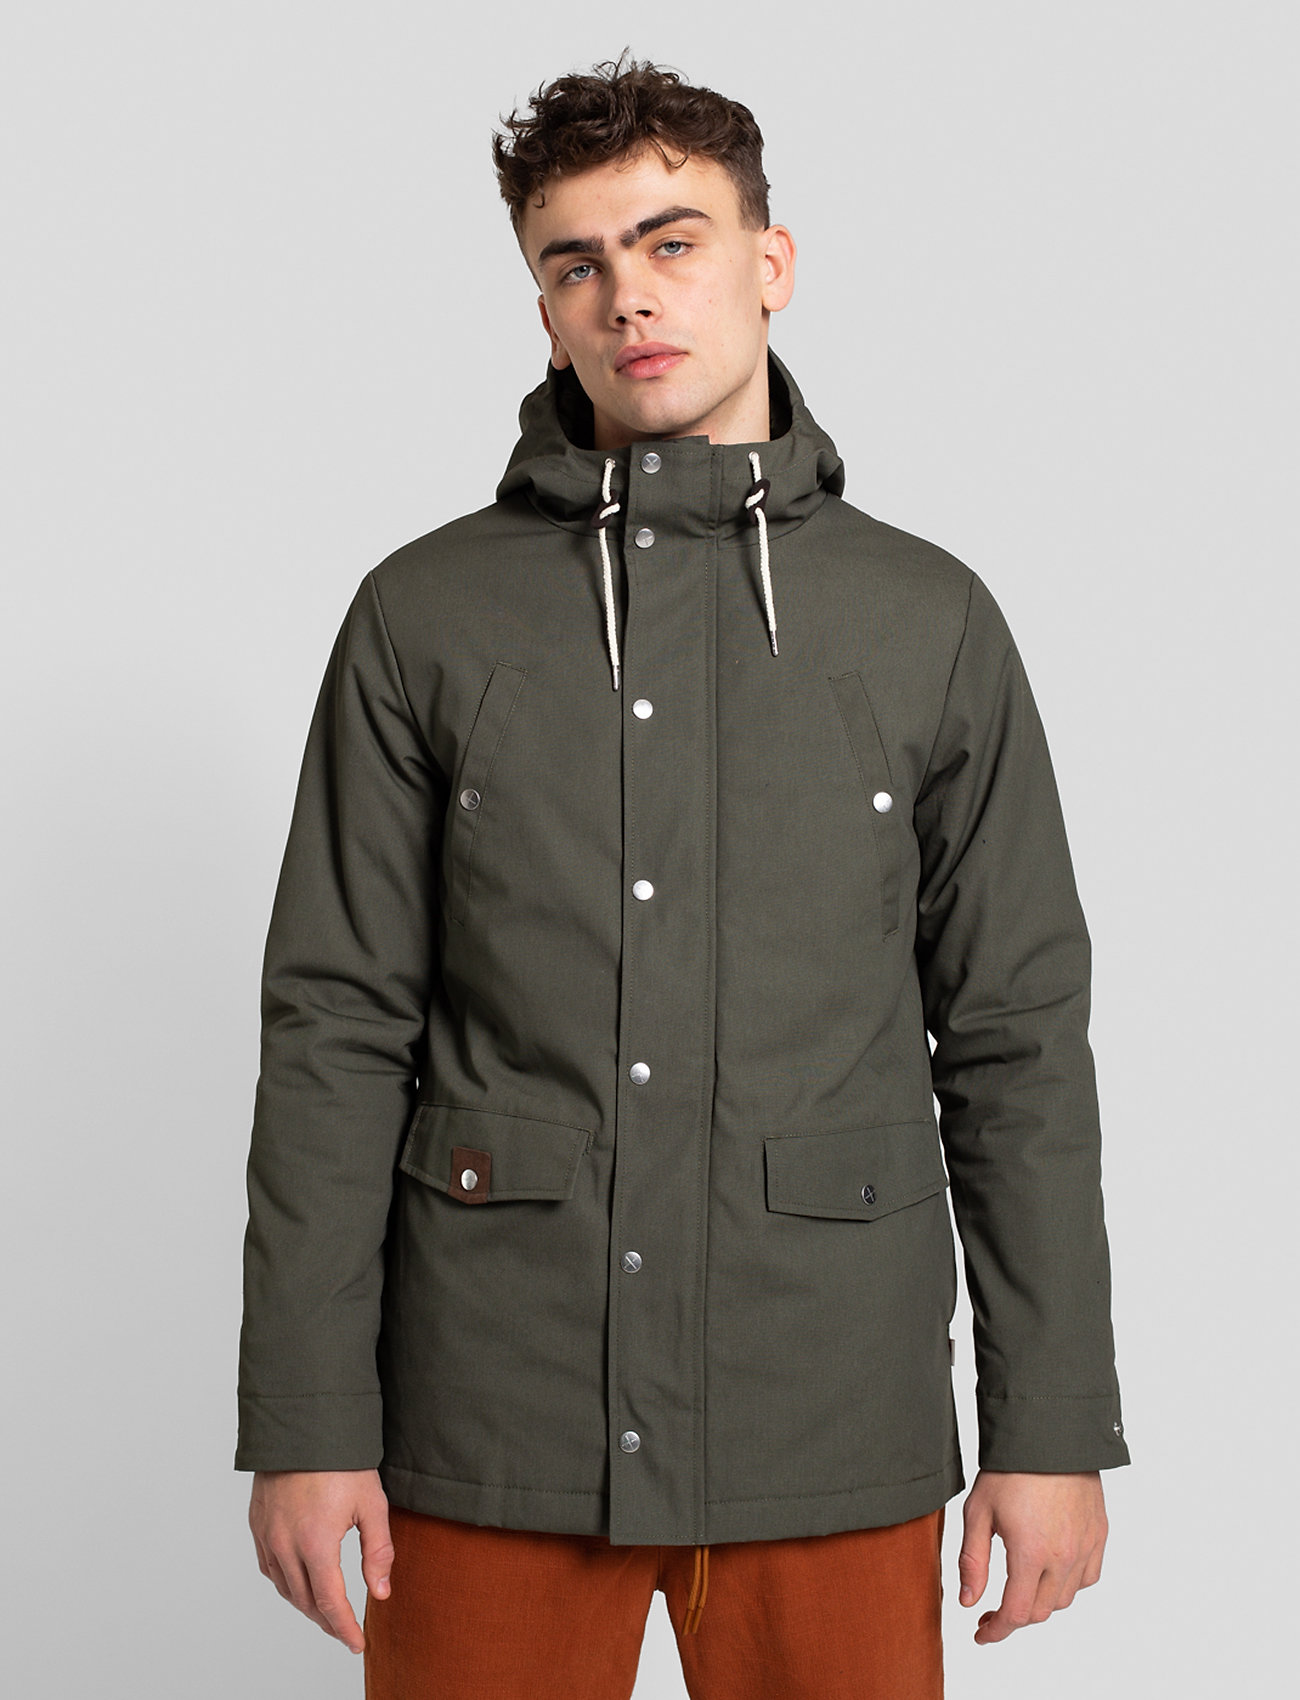 Revolution Parka Jacket - 179.95 €. Buy Parkas from Revolution at Fast delivery and easy returns